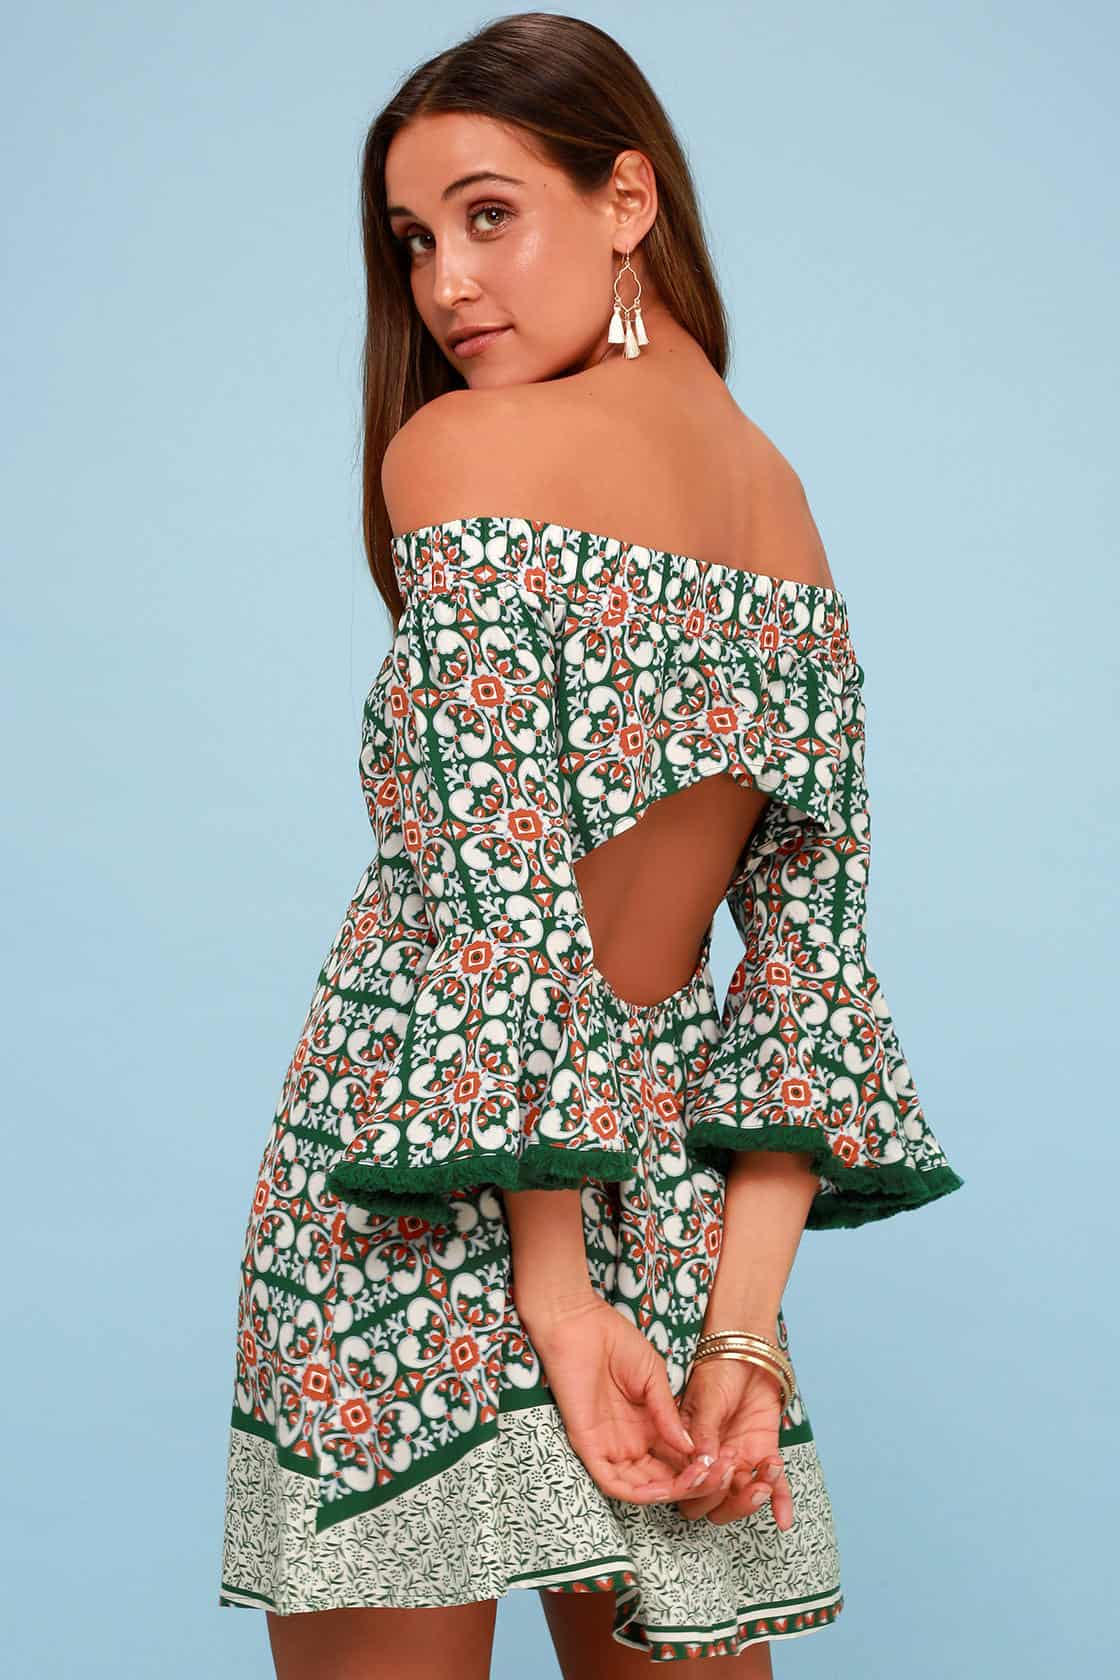 Amalfi Coast Outfits Positano Italy Dresses Green Pattern Off The Shoulder Floral Print Mini Dress